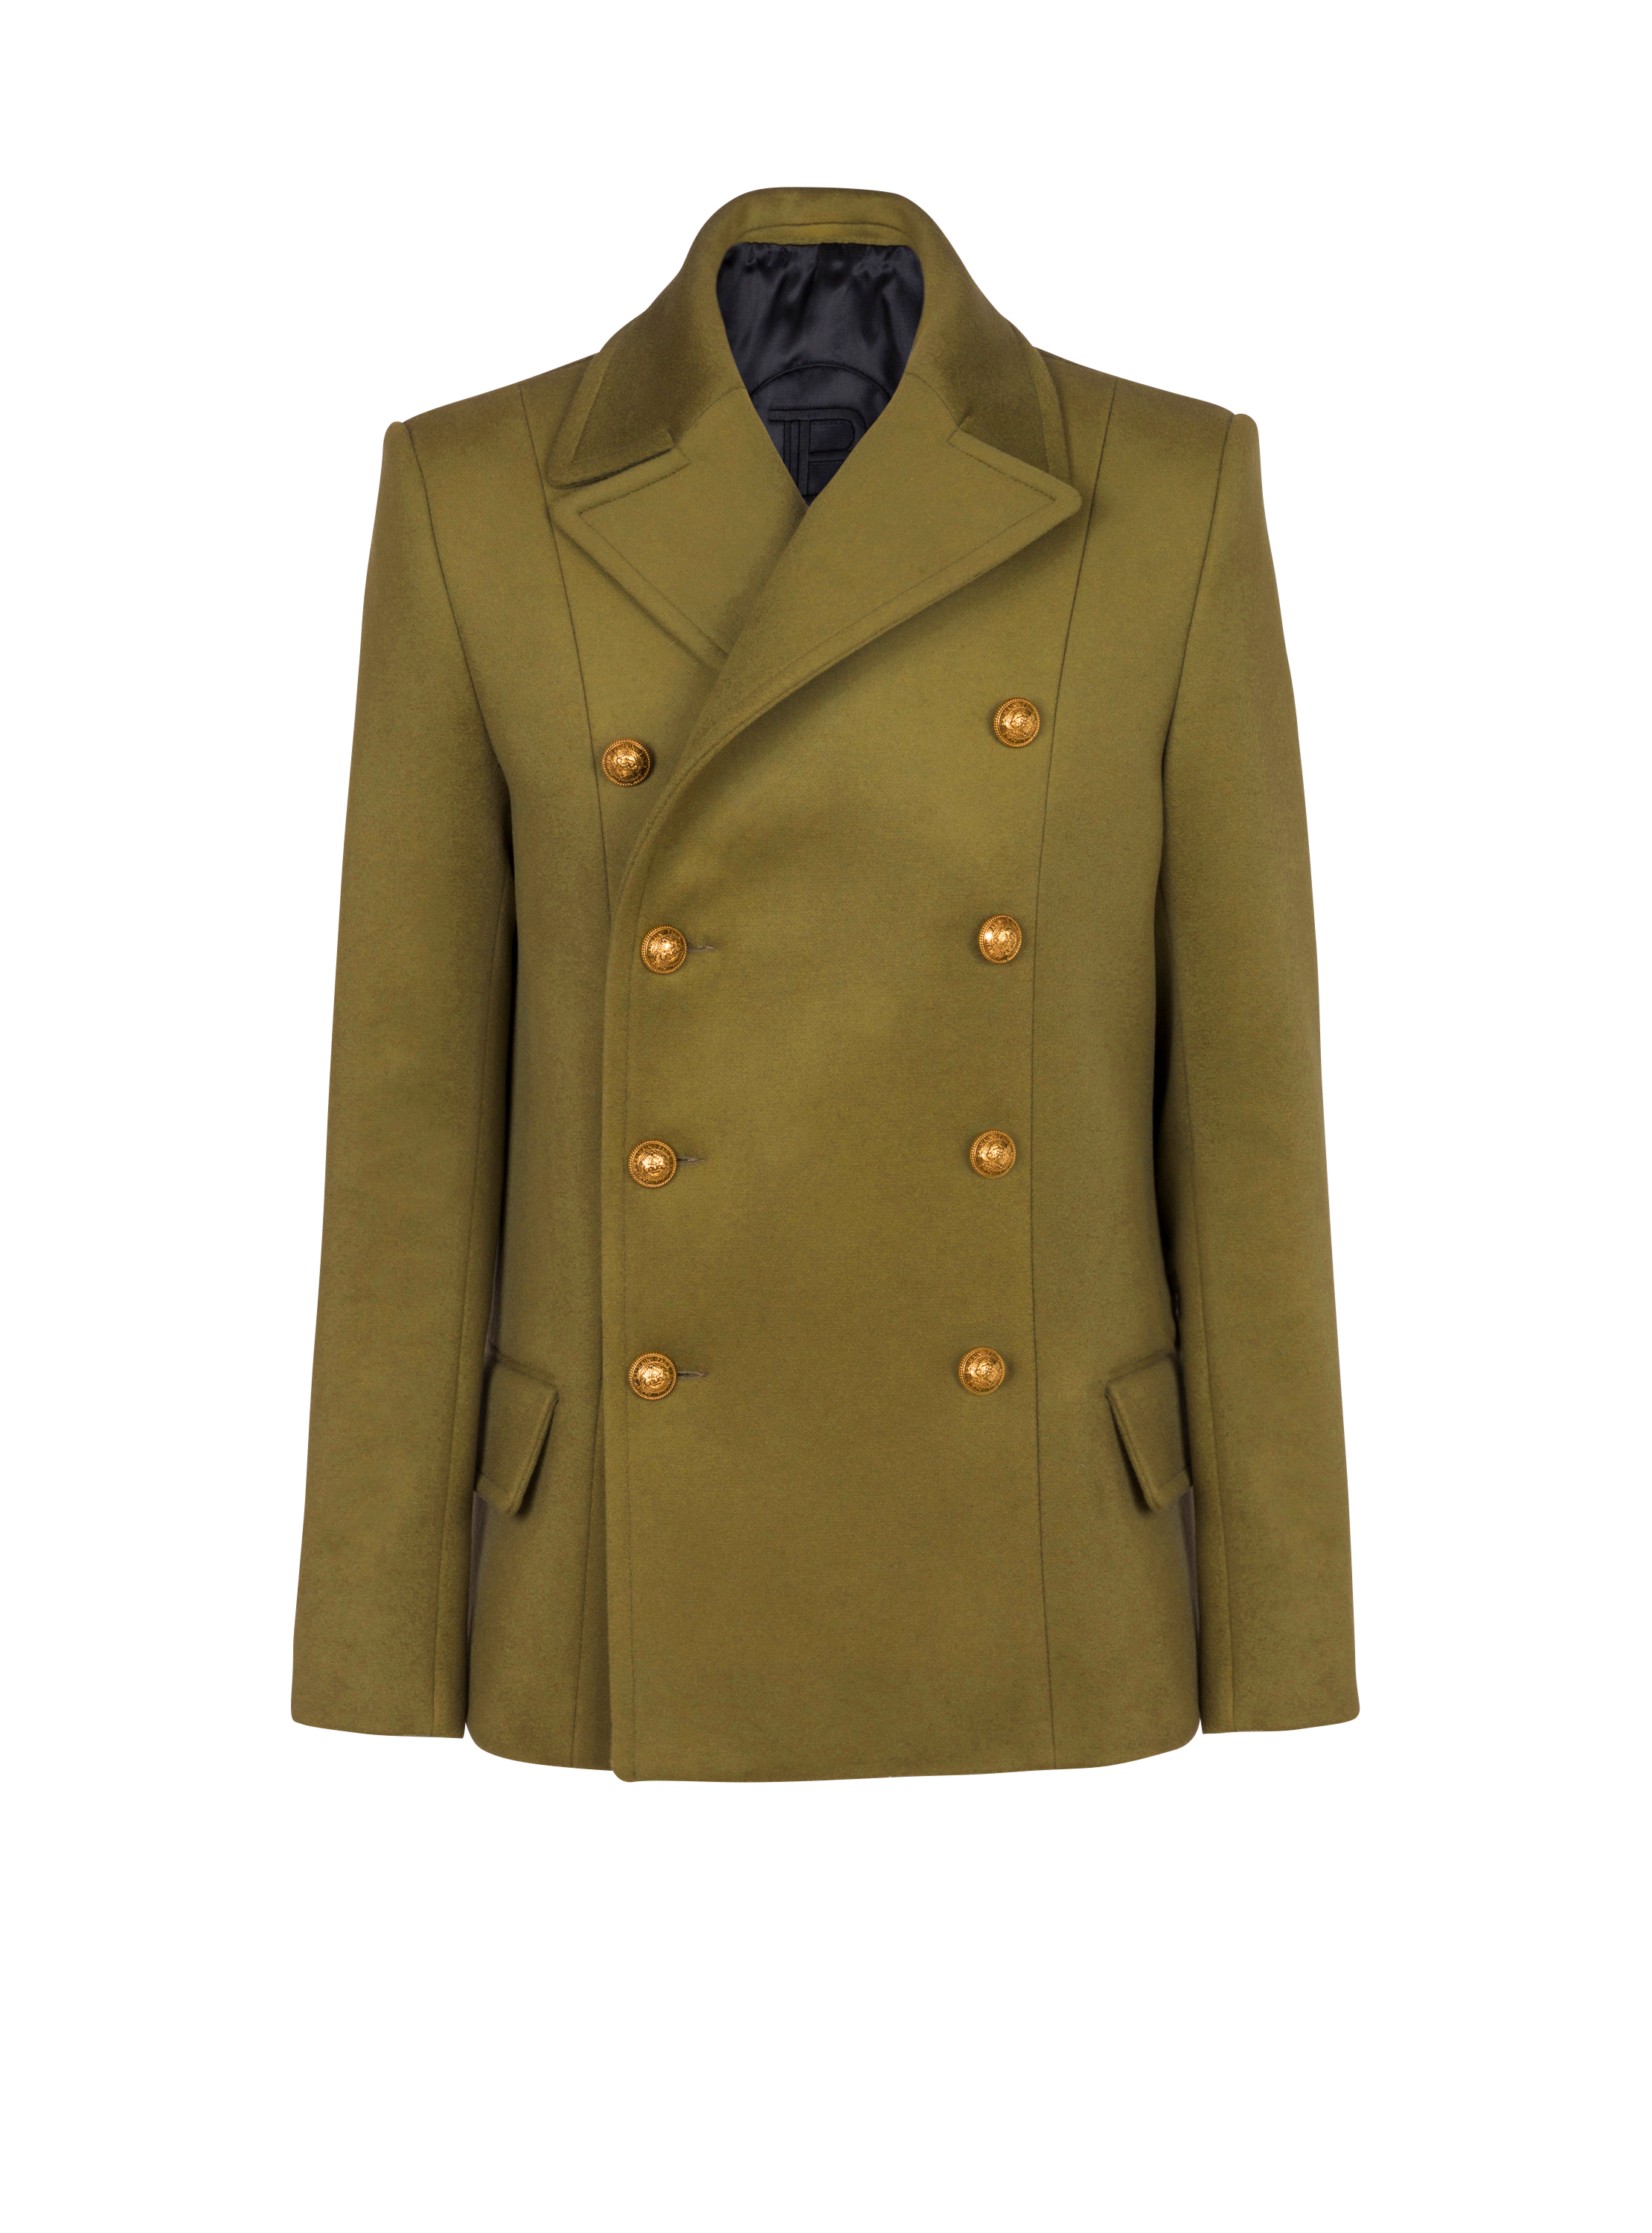 Double-breasted wool pea coat